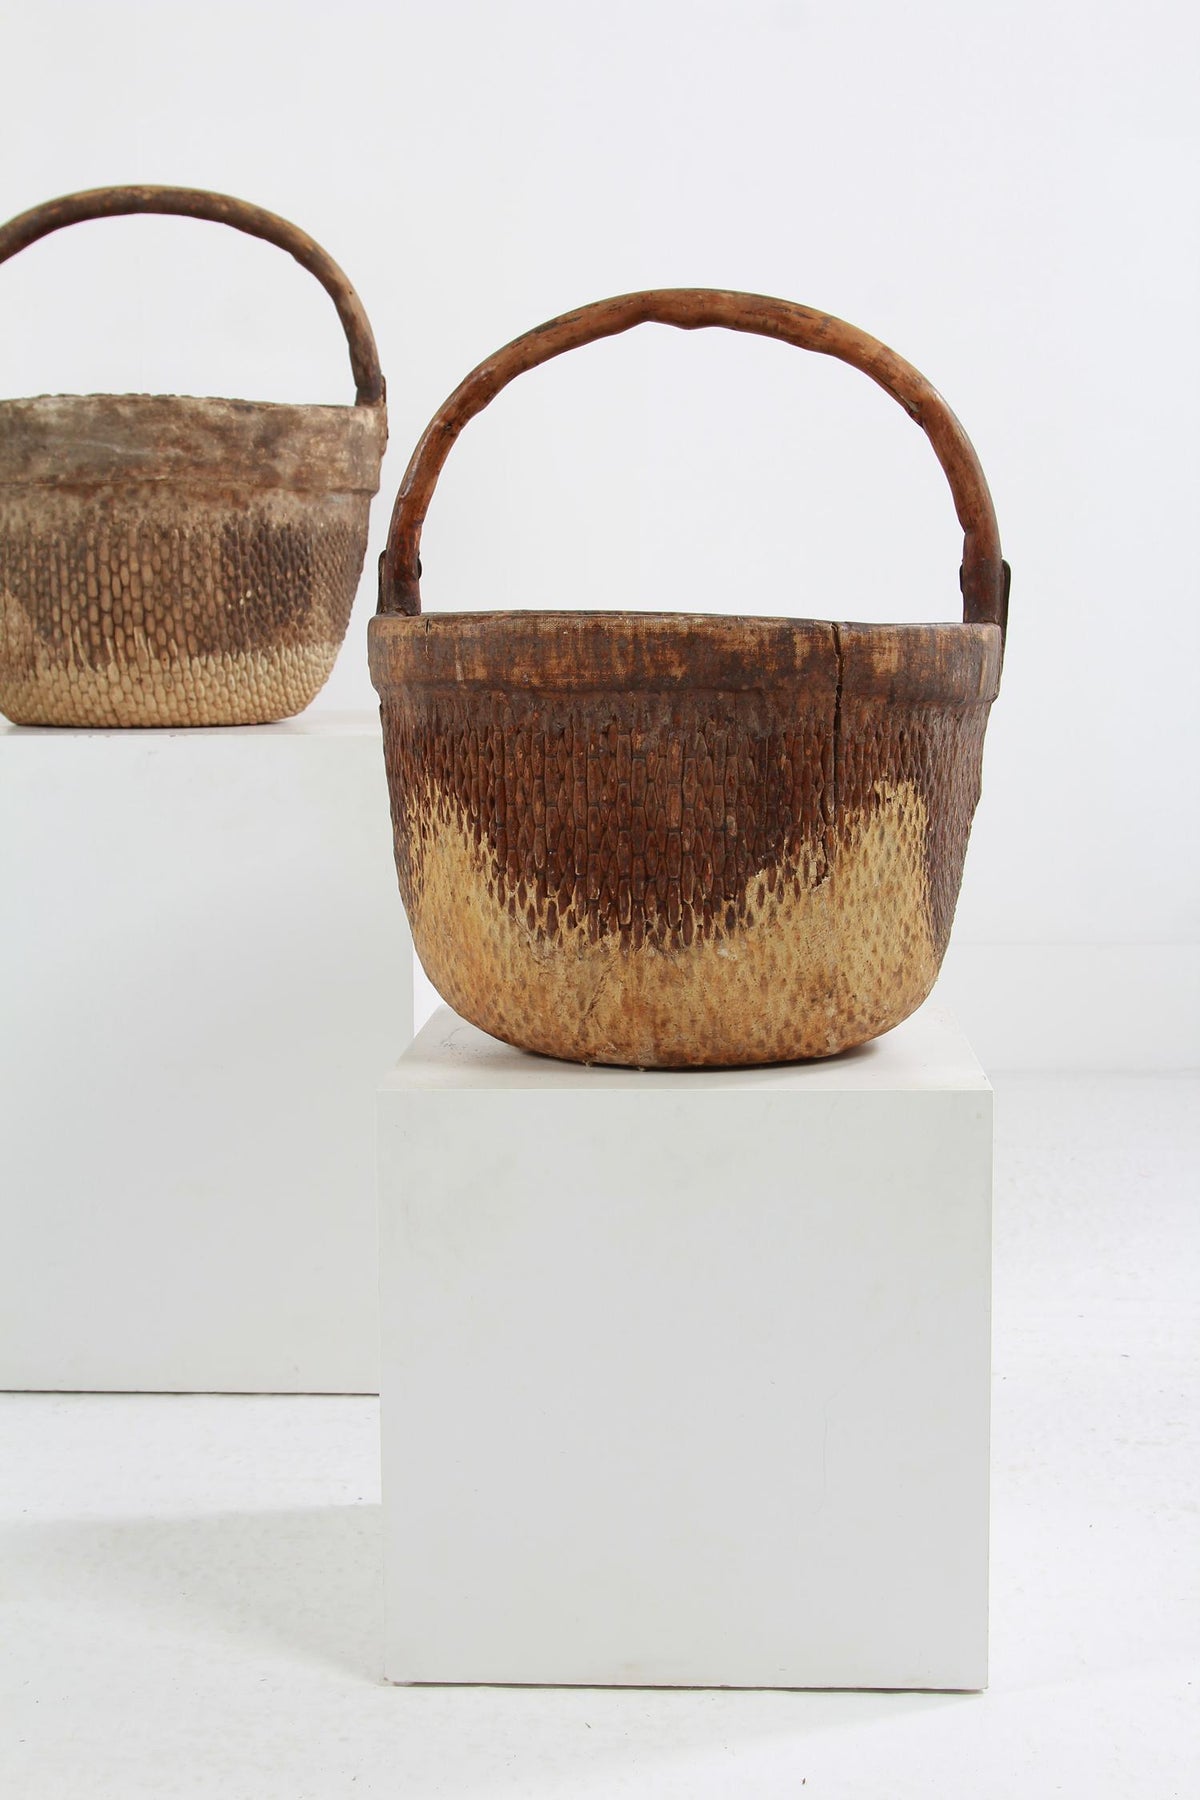 WONDERFUL  Rustic ANTIQUE WOVEN RICE BASKETS WITH  TREE BRANCH HANDLES